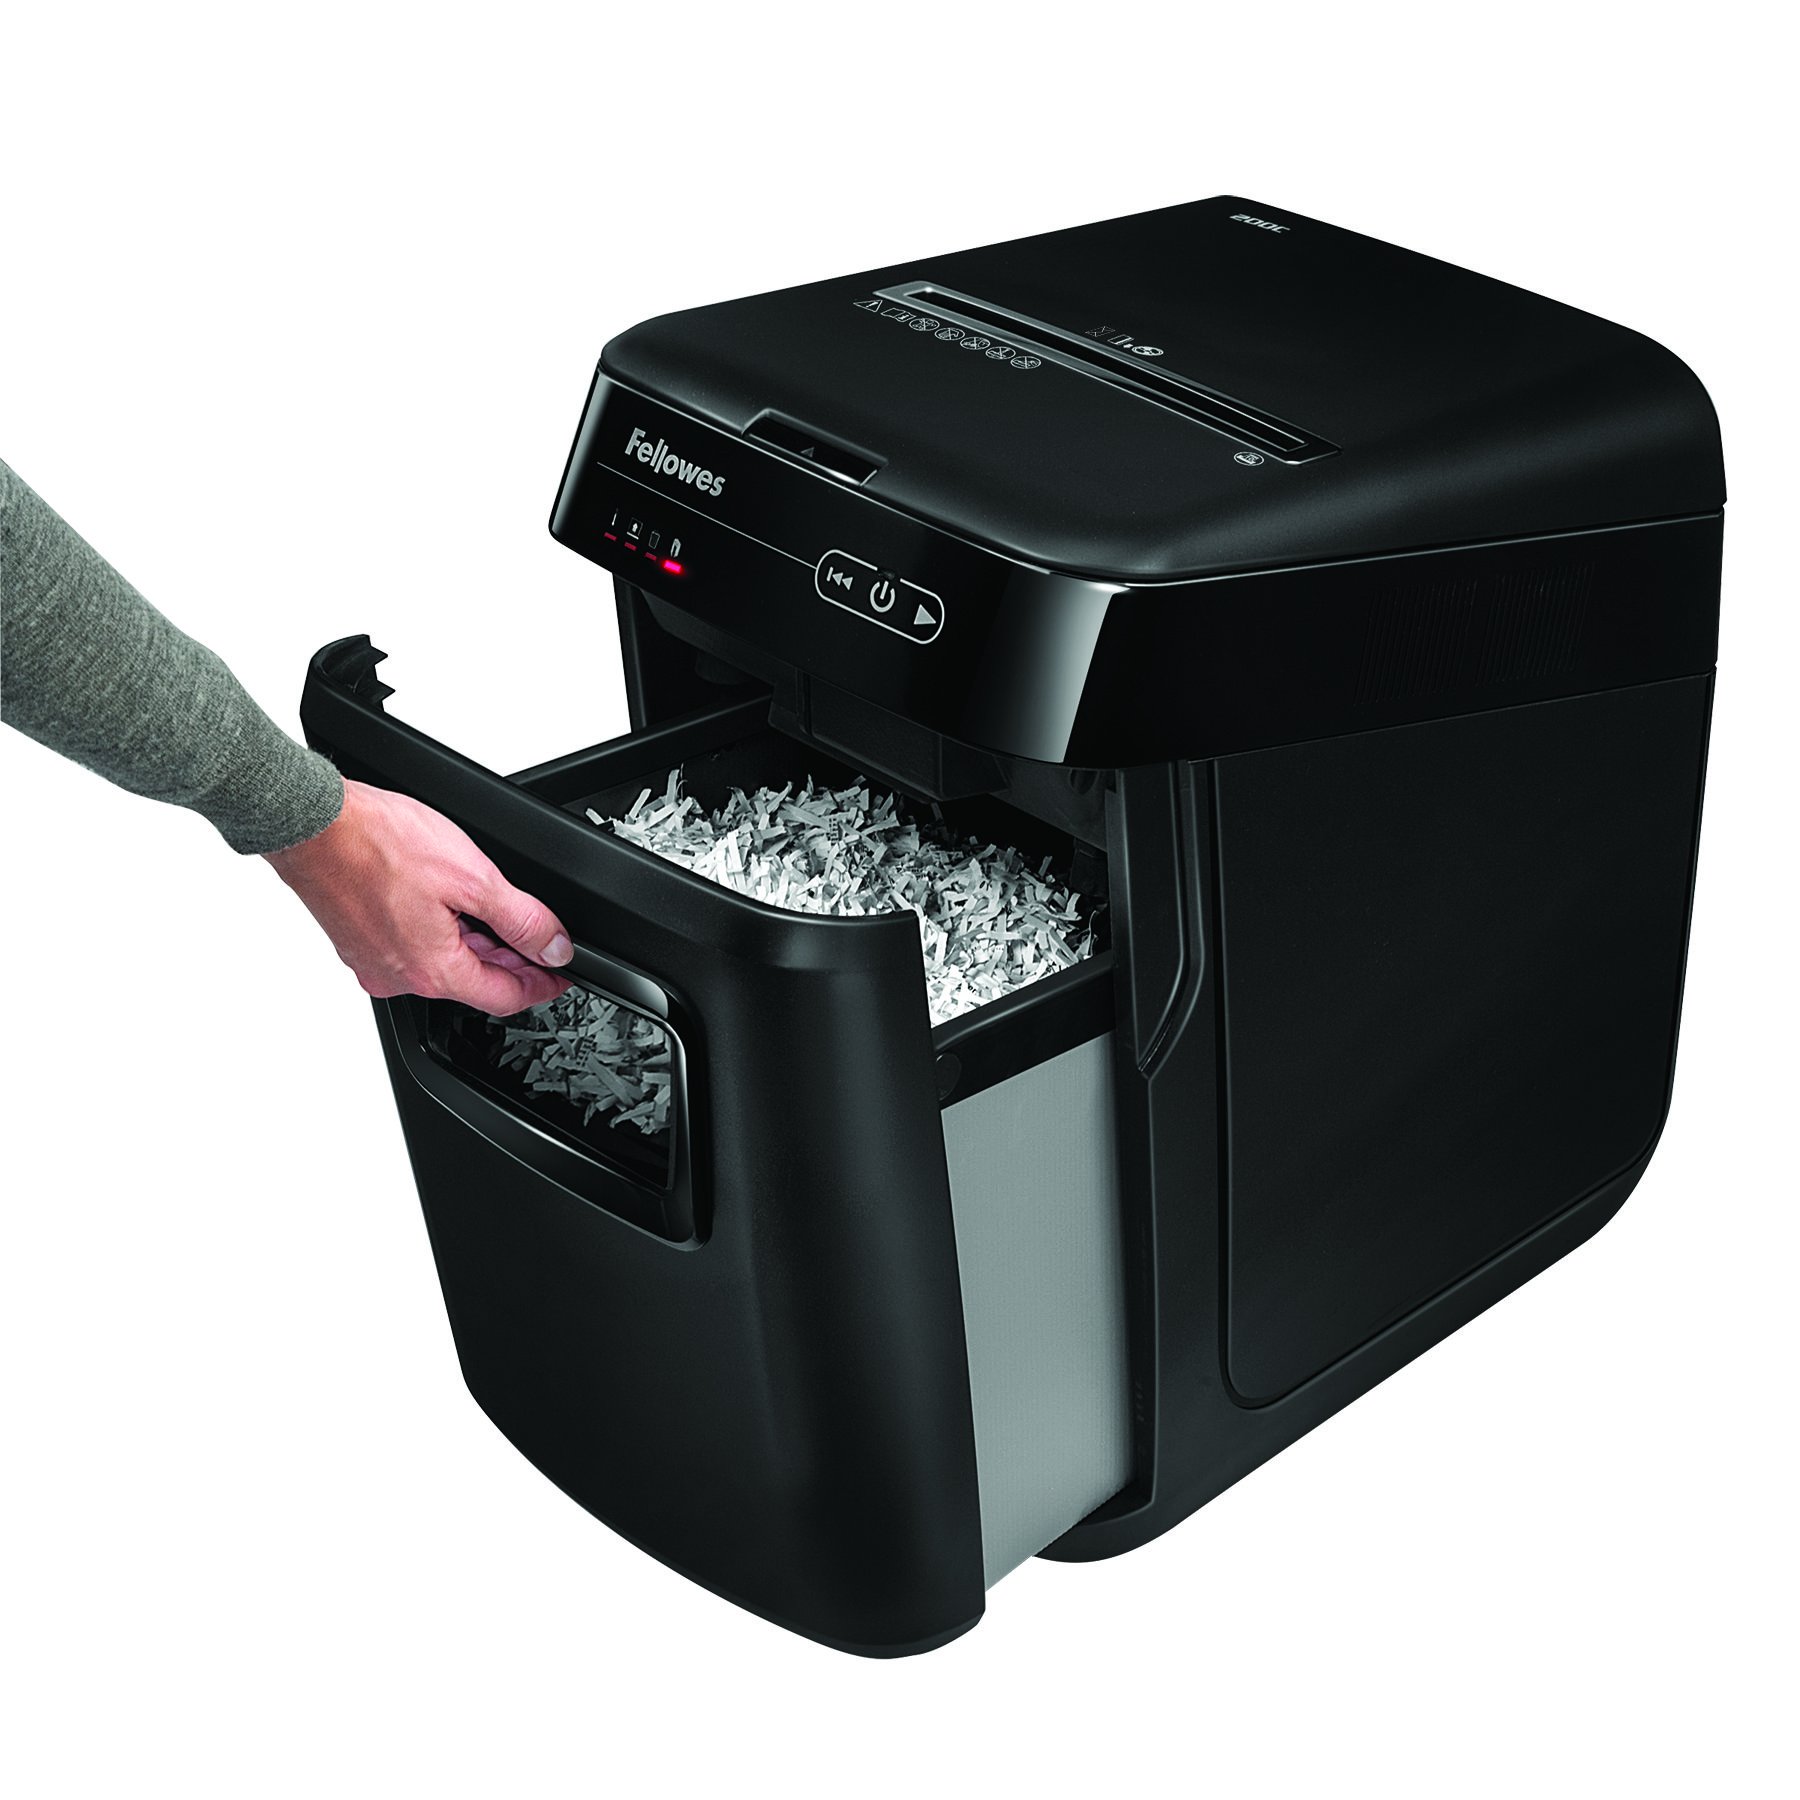 Fellowes AutoMax 200C Cross-Cut Auto Feed 2-in-1 Office Shredder with Auto Feed 200-Sheet Capacity (4653501)